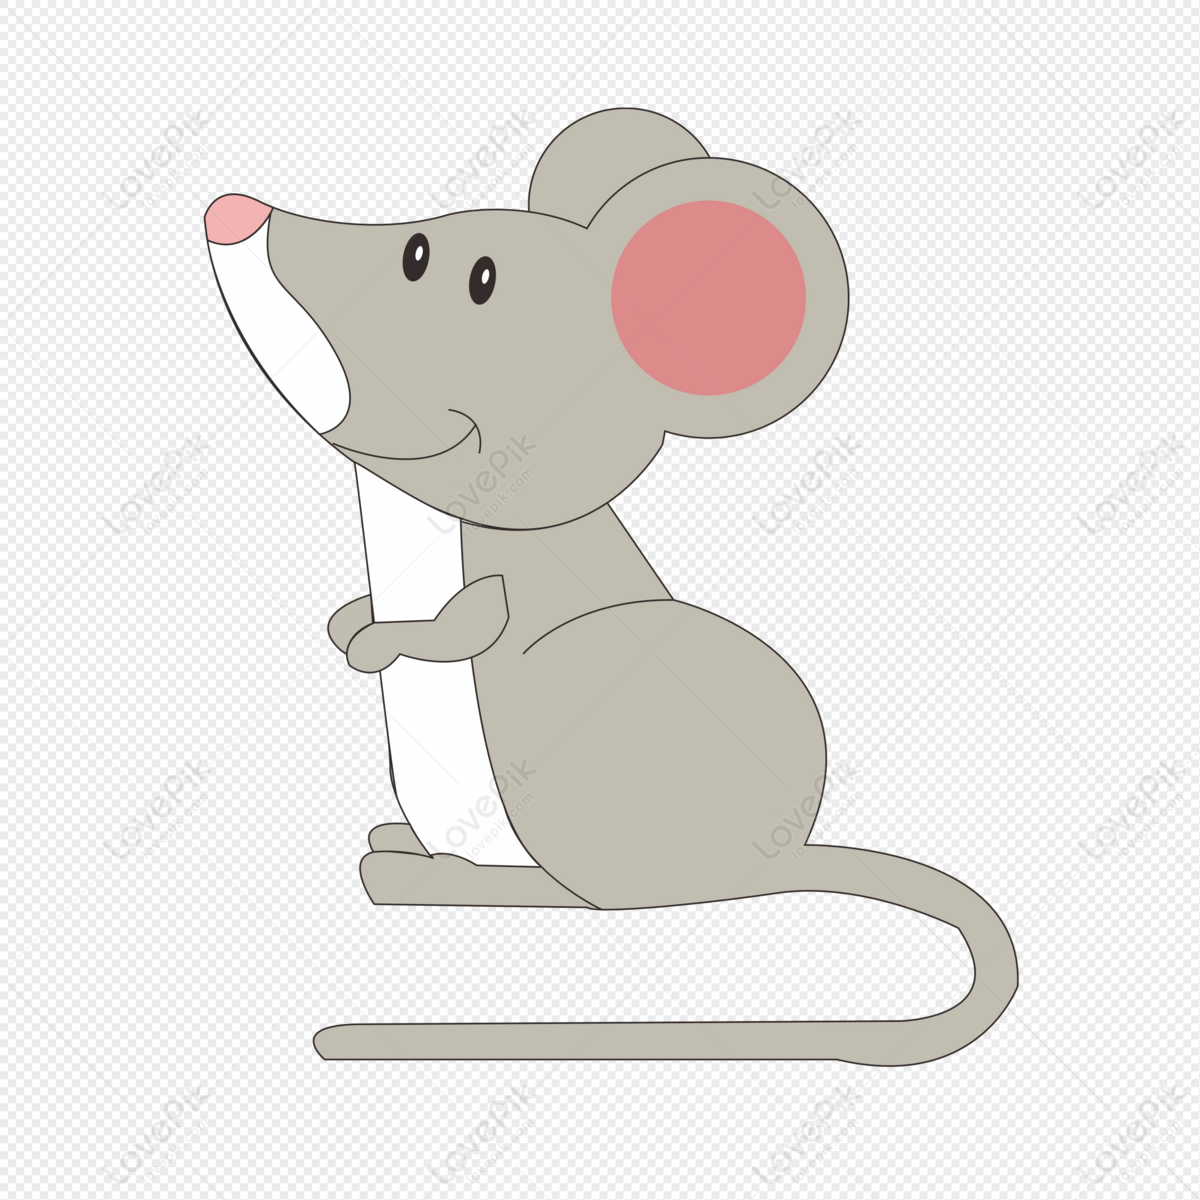 Cartoon Cute Mouse PNG Hd Transparent Image And Clipart Image For Free  Download - Lovepik | 401528814